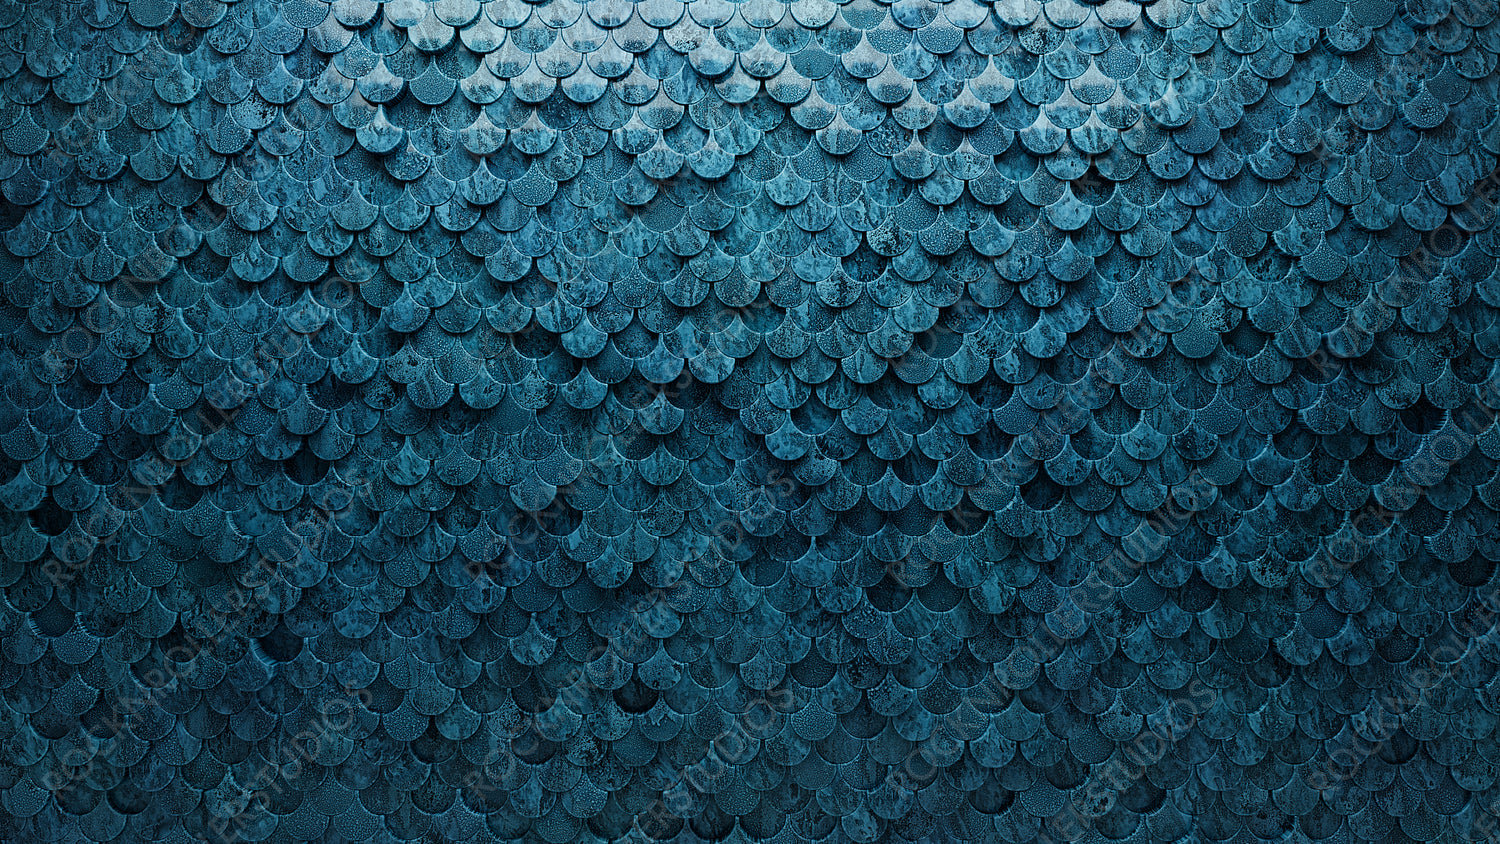 Polished, 3D Wall background with tiles. Fish Scale, tile Wallpaper with Textured, Blue Patina blocks. 3D Render